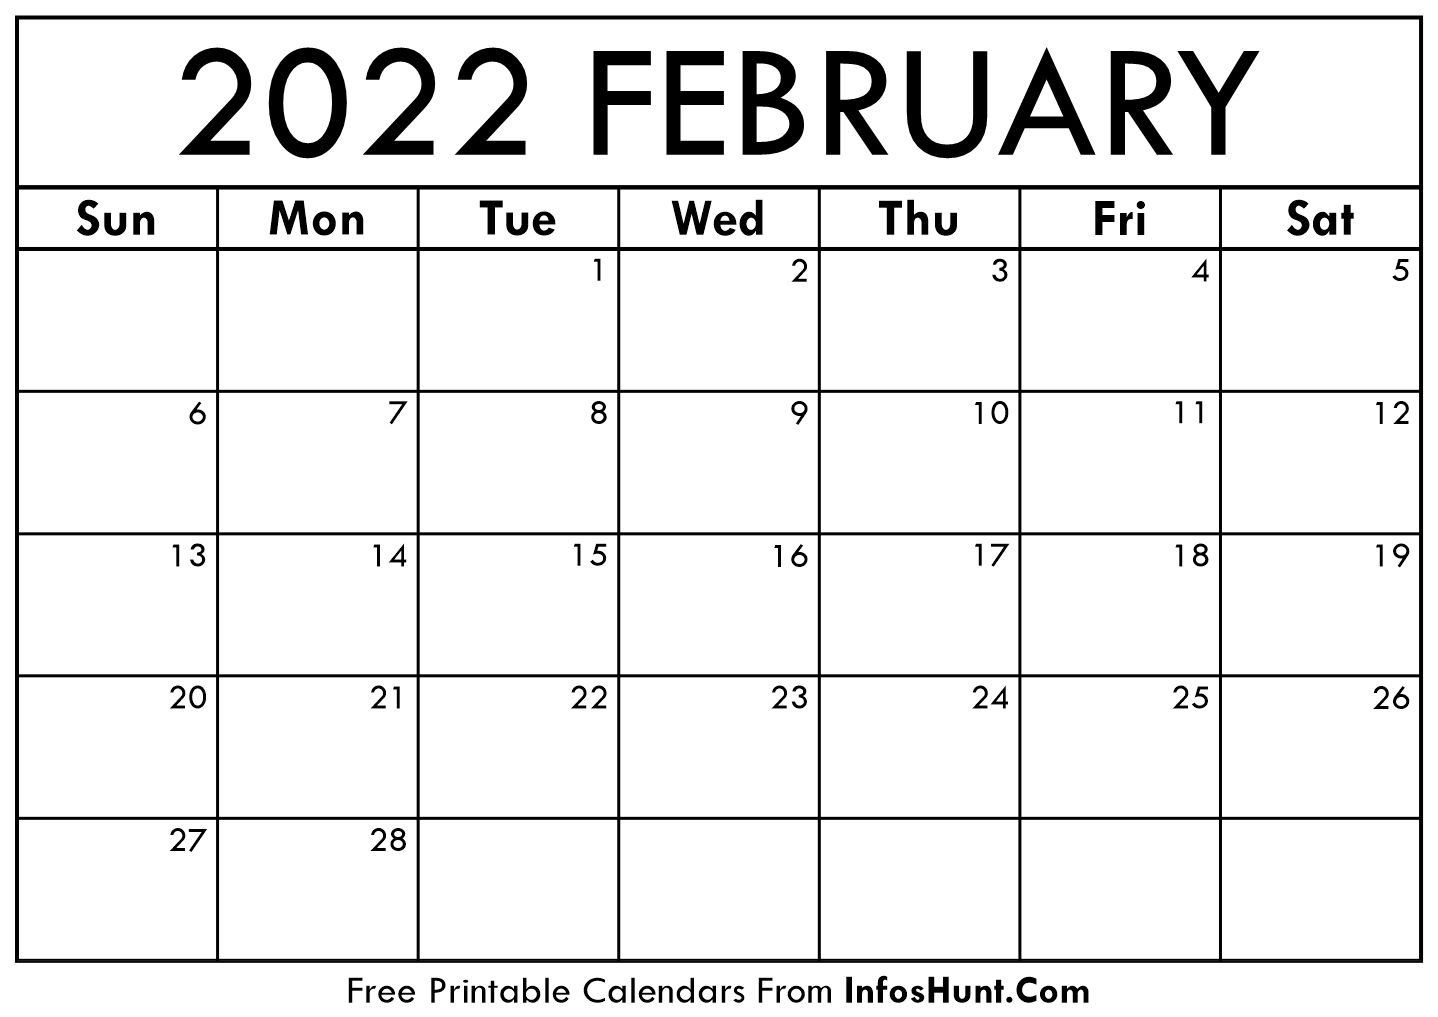 February 2022 Calendar Printable - Free Yearly &amp; Monthly